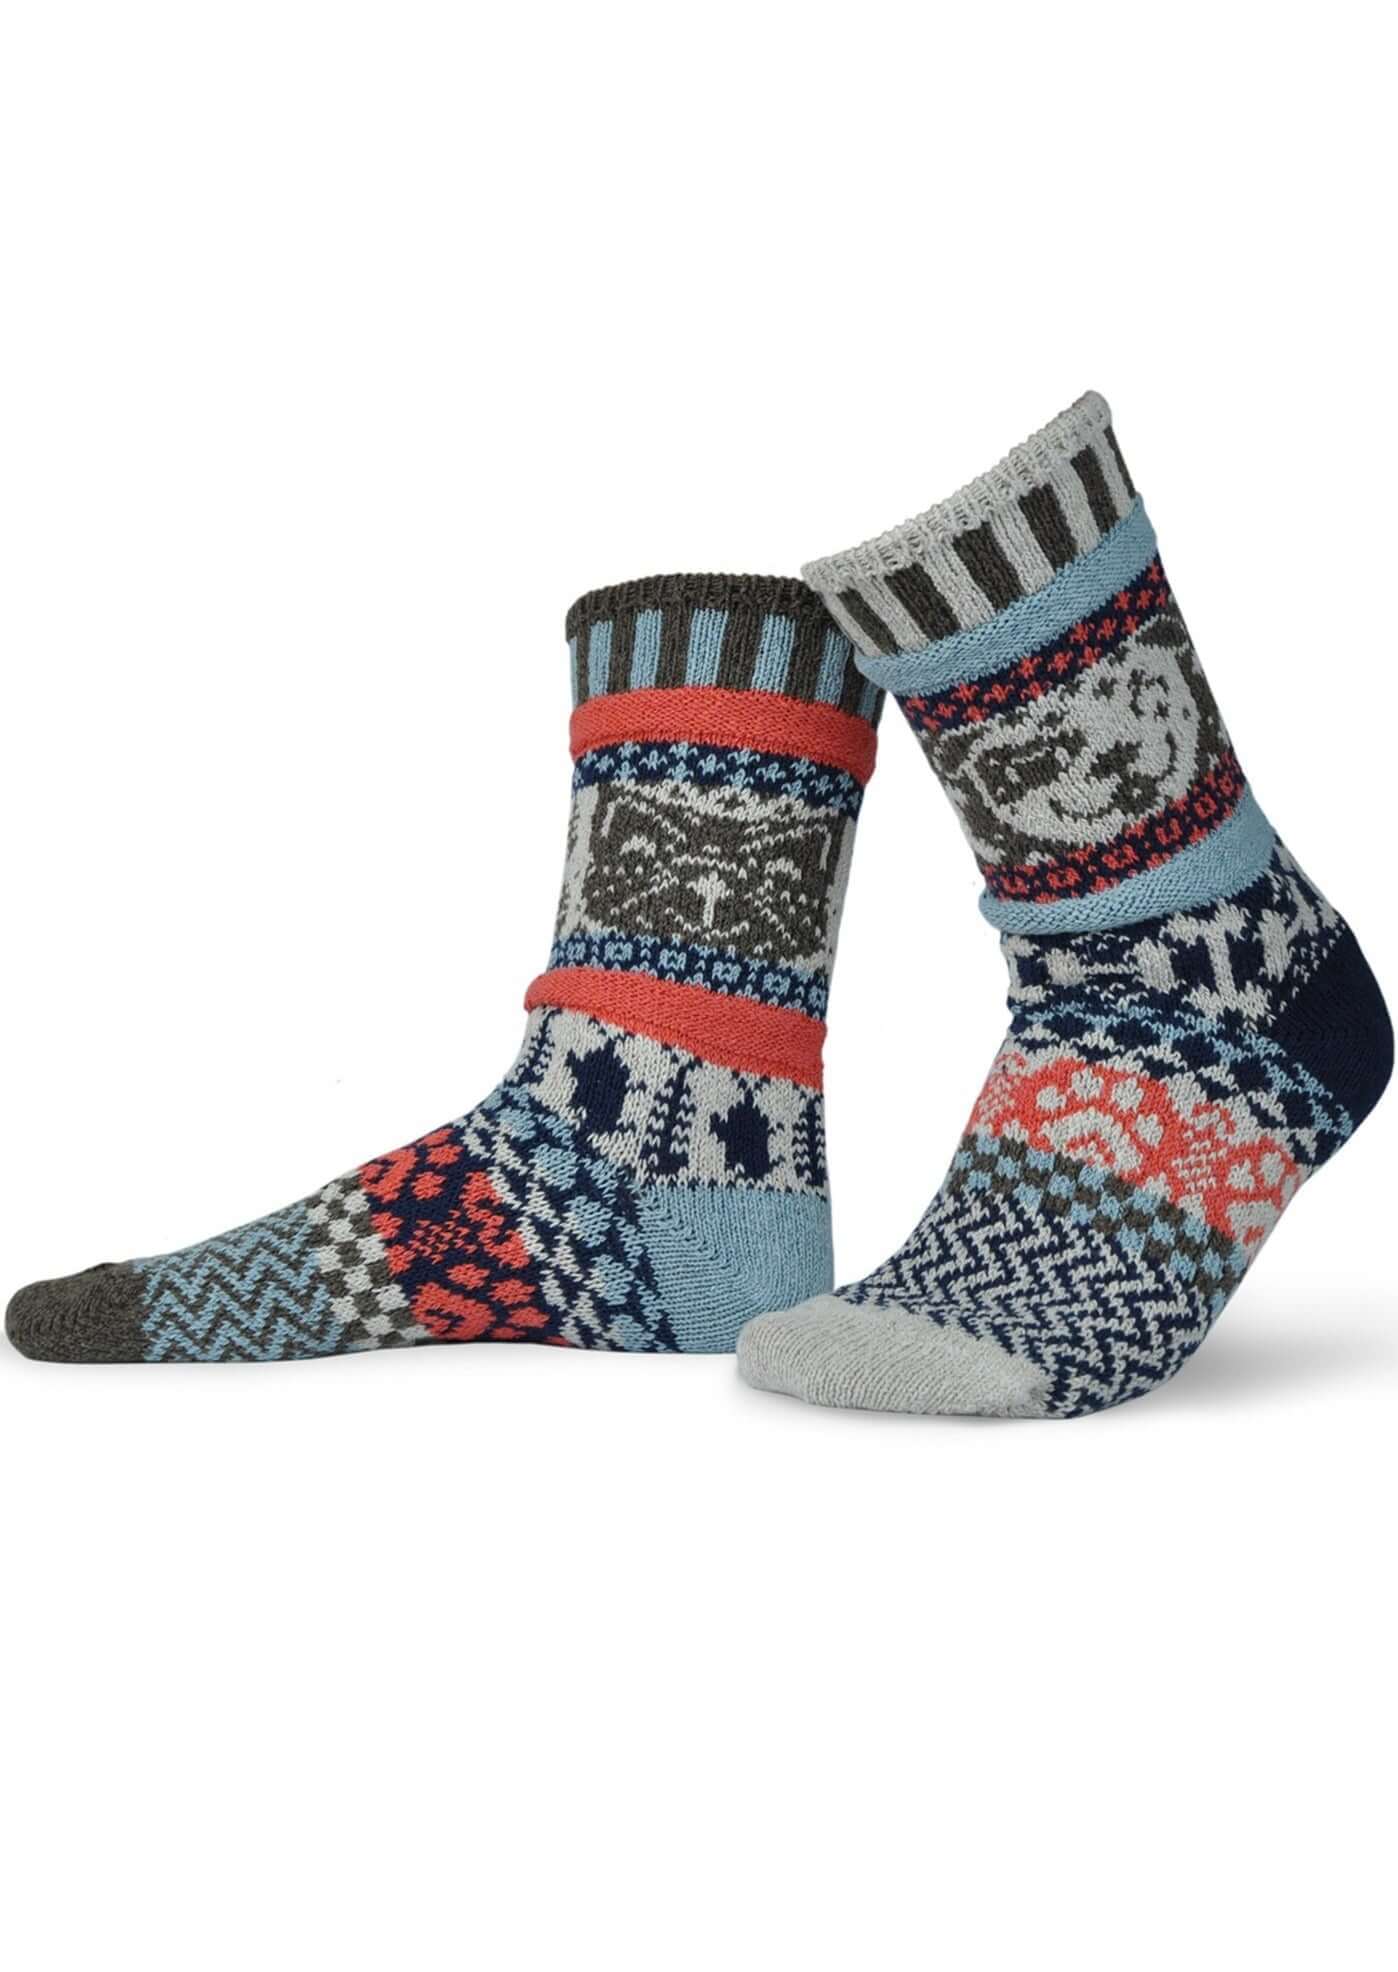 Solmate PET RESCUE Knitted Crew Socks | Made In USA | Delightfully Mismatched & so Very Comfortable. Classy Cozy Cool Women's Boutique.